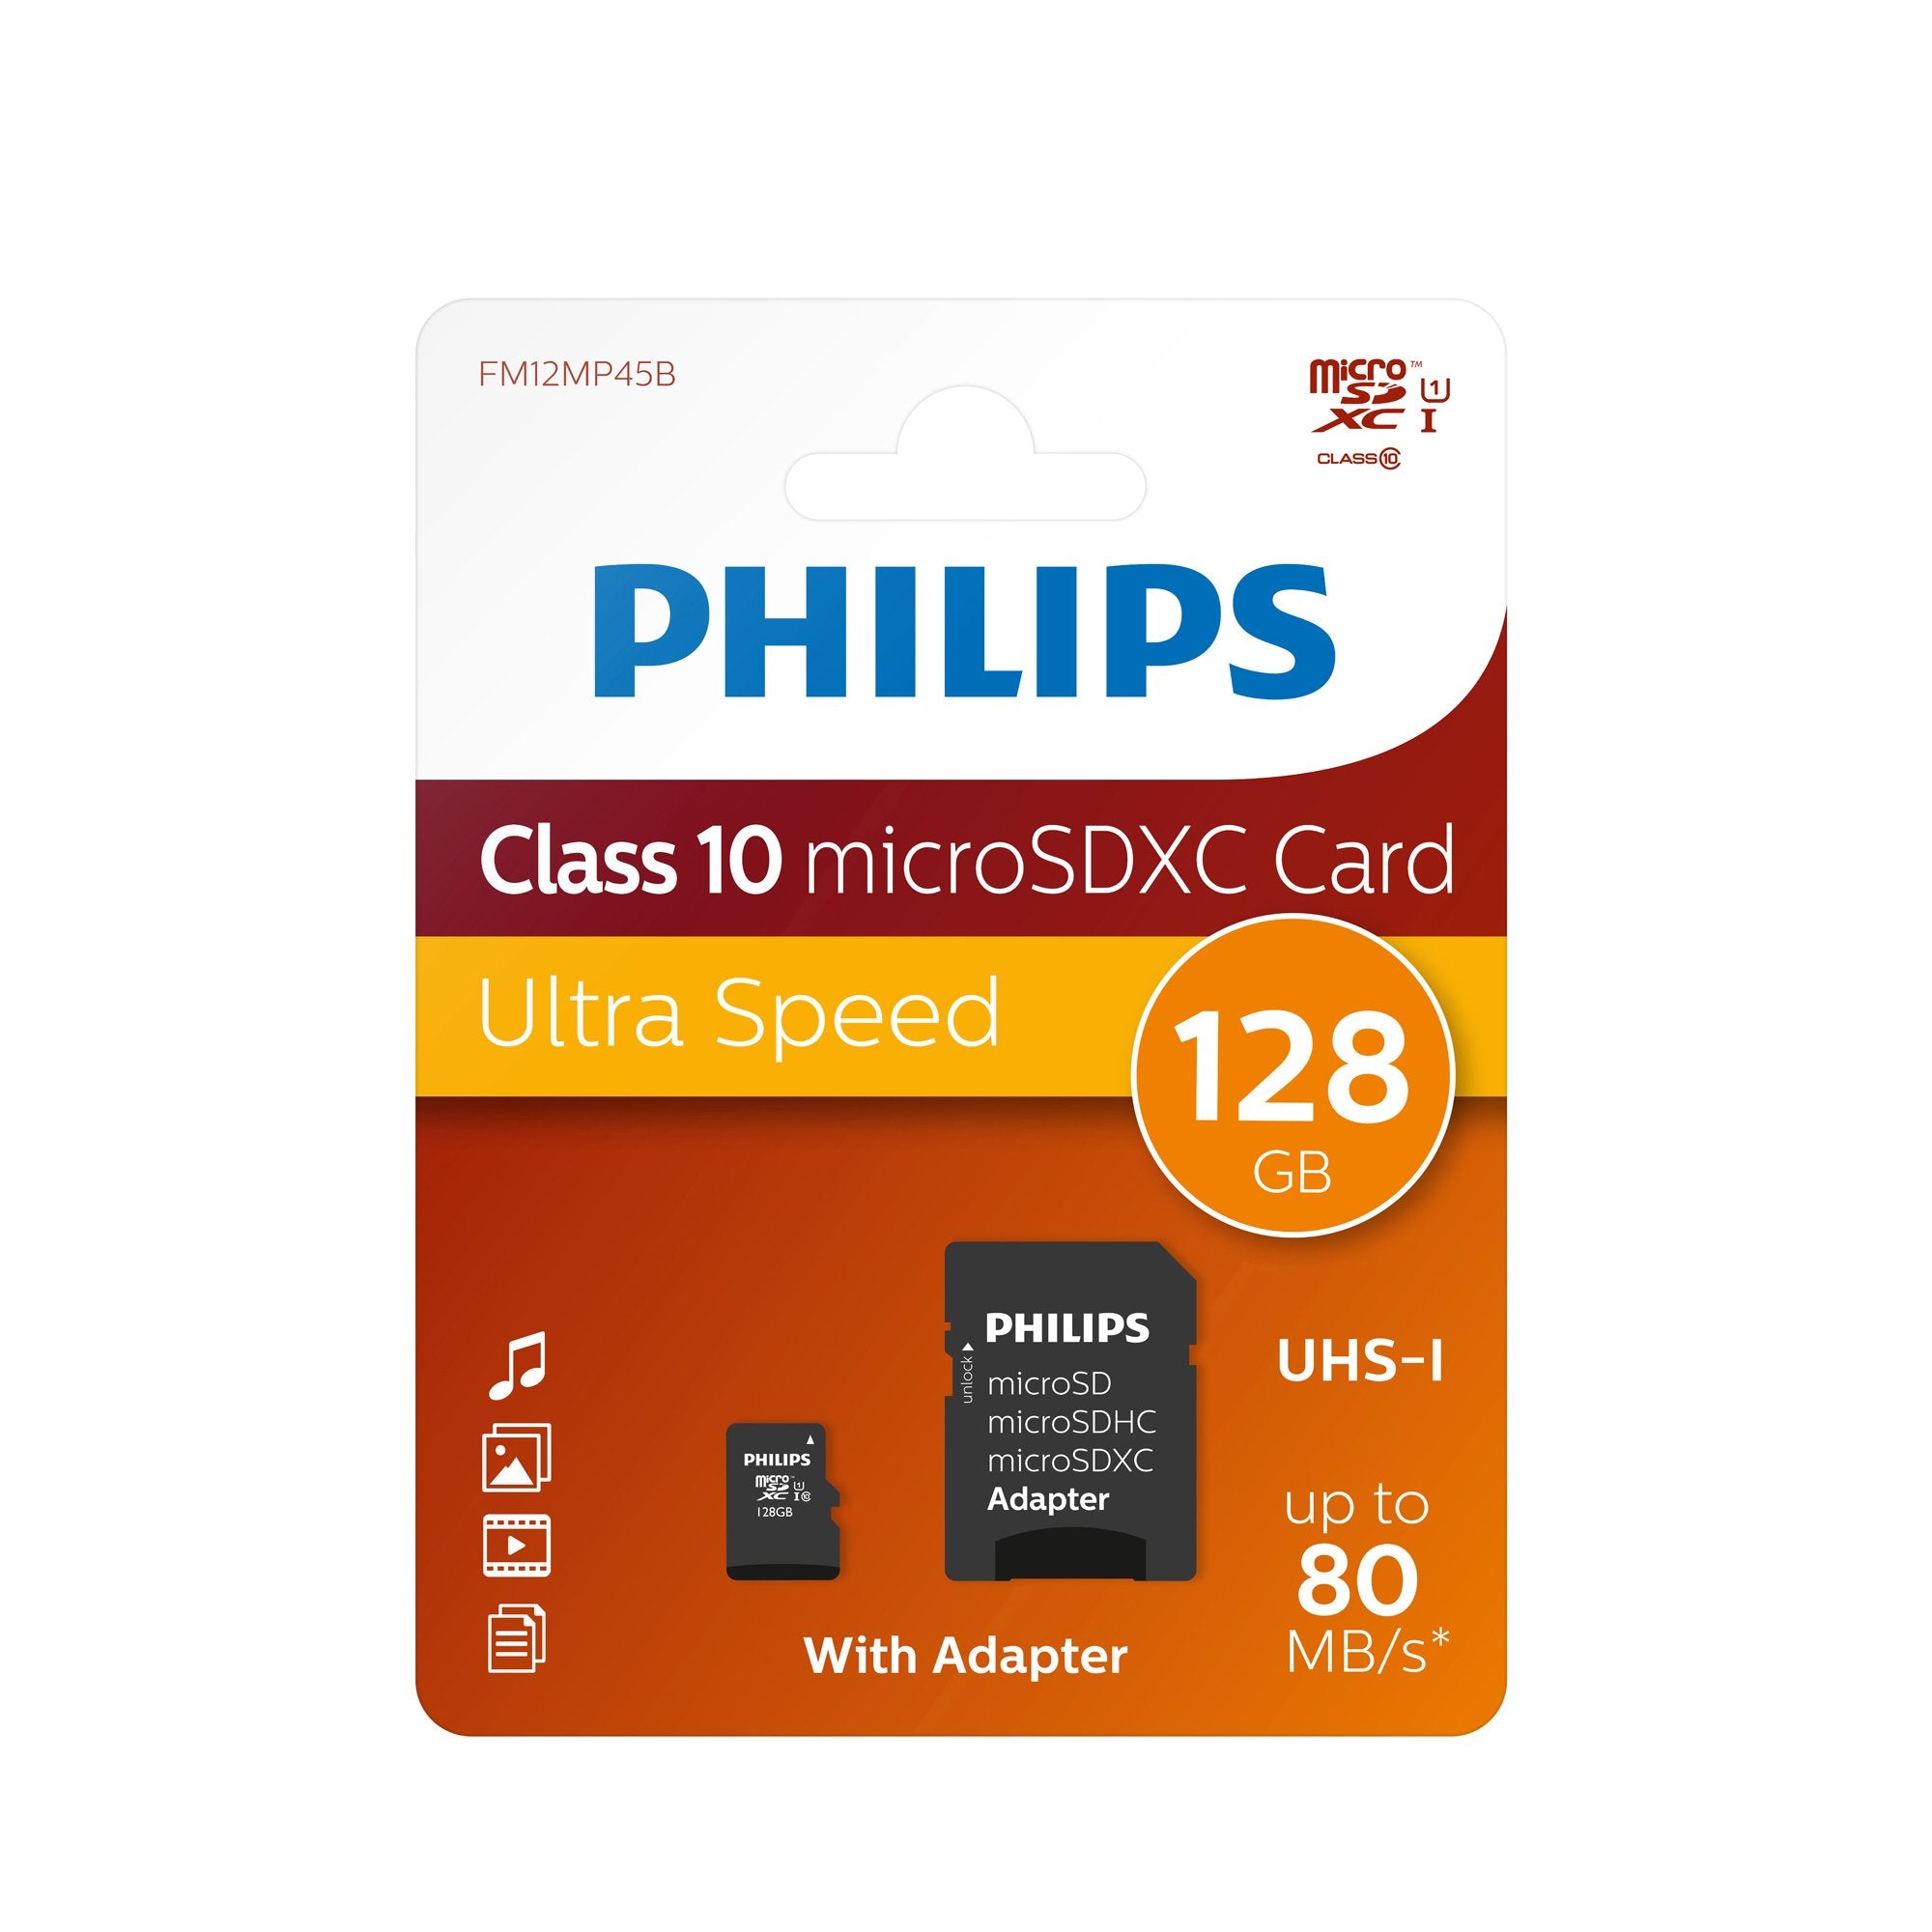 philips-micro-sdxc-card-128gb-class-10-incl-adapter